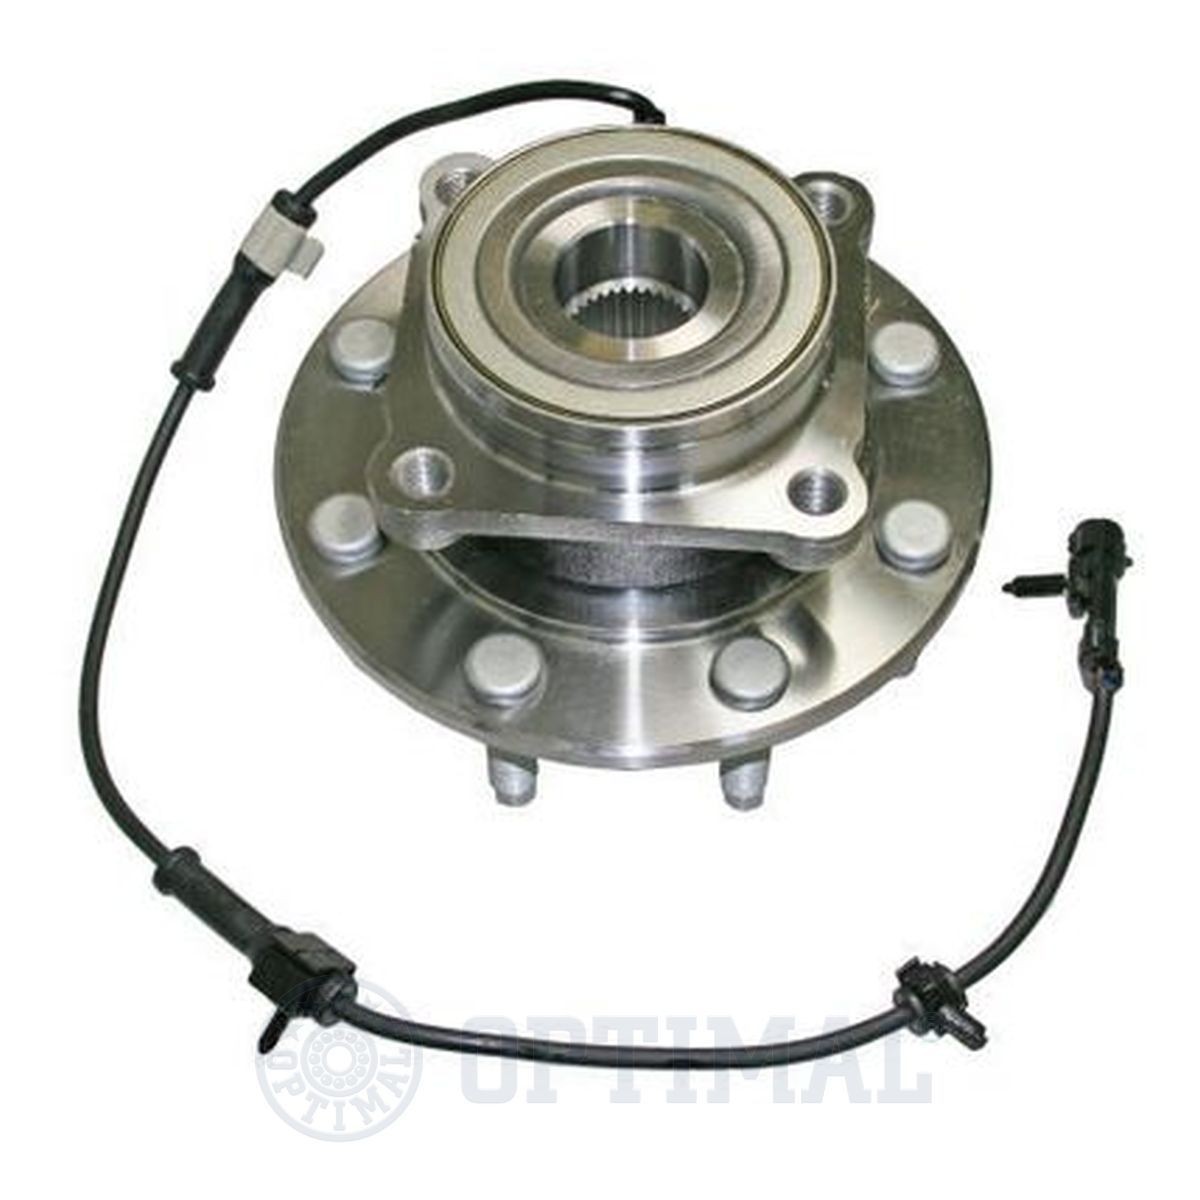 OPTIMAL 251347 Wheel bearing kit with integrated ABS sensor, with ABS sensor ring, 200 mm